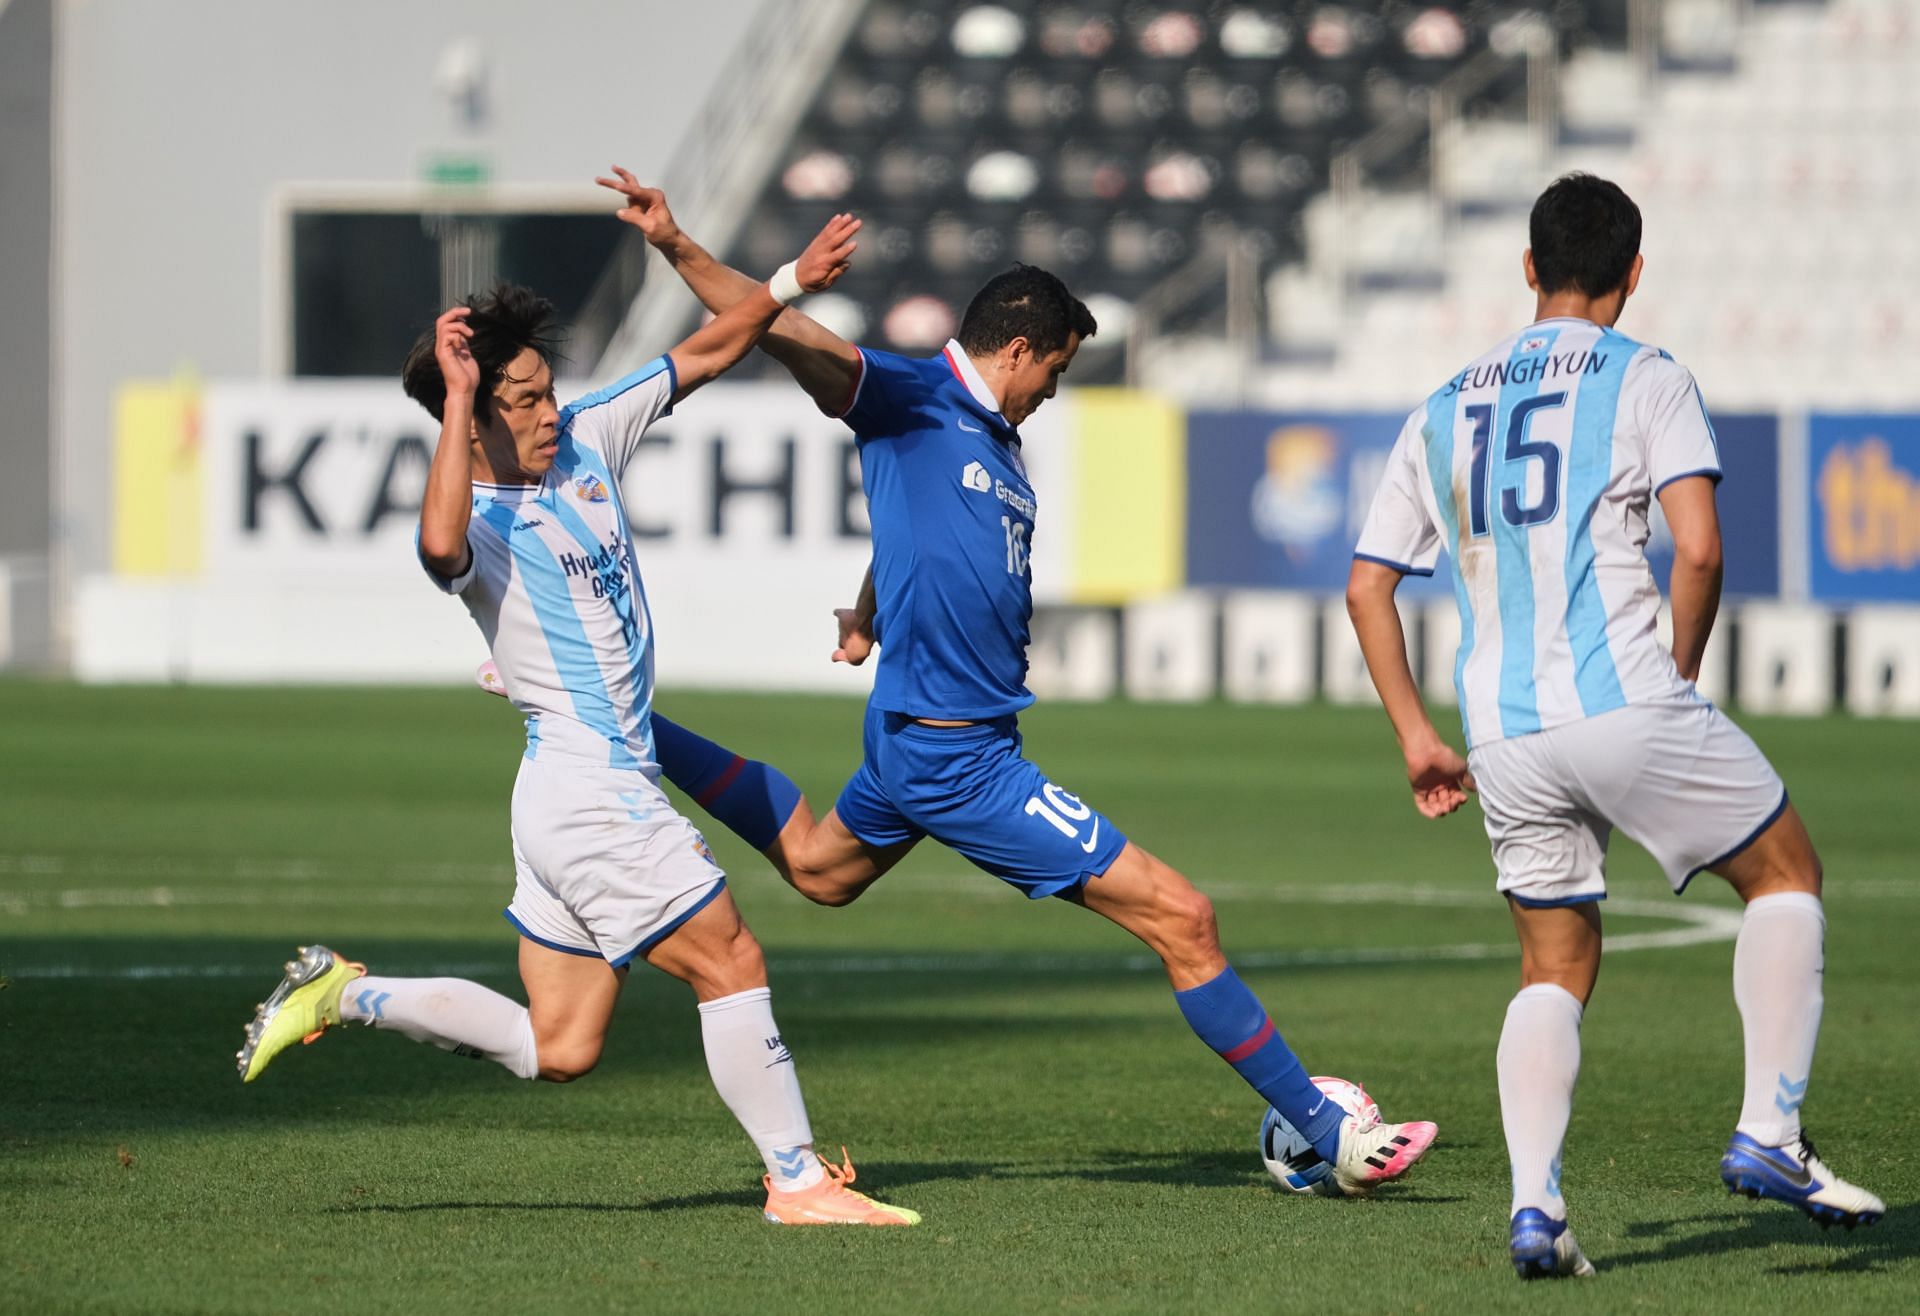 Shanghai Shenhua will have a tough task on their hands this weekend.